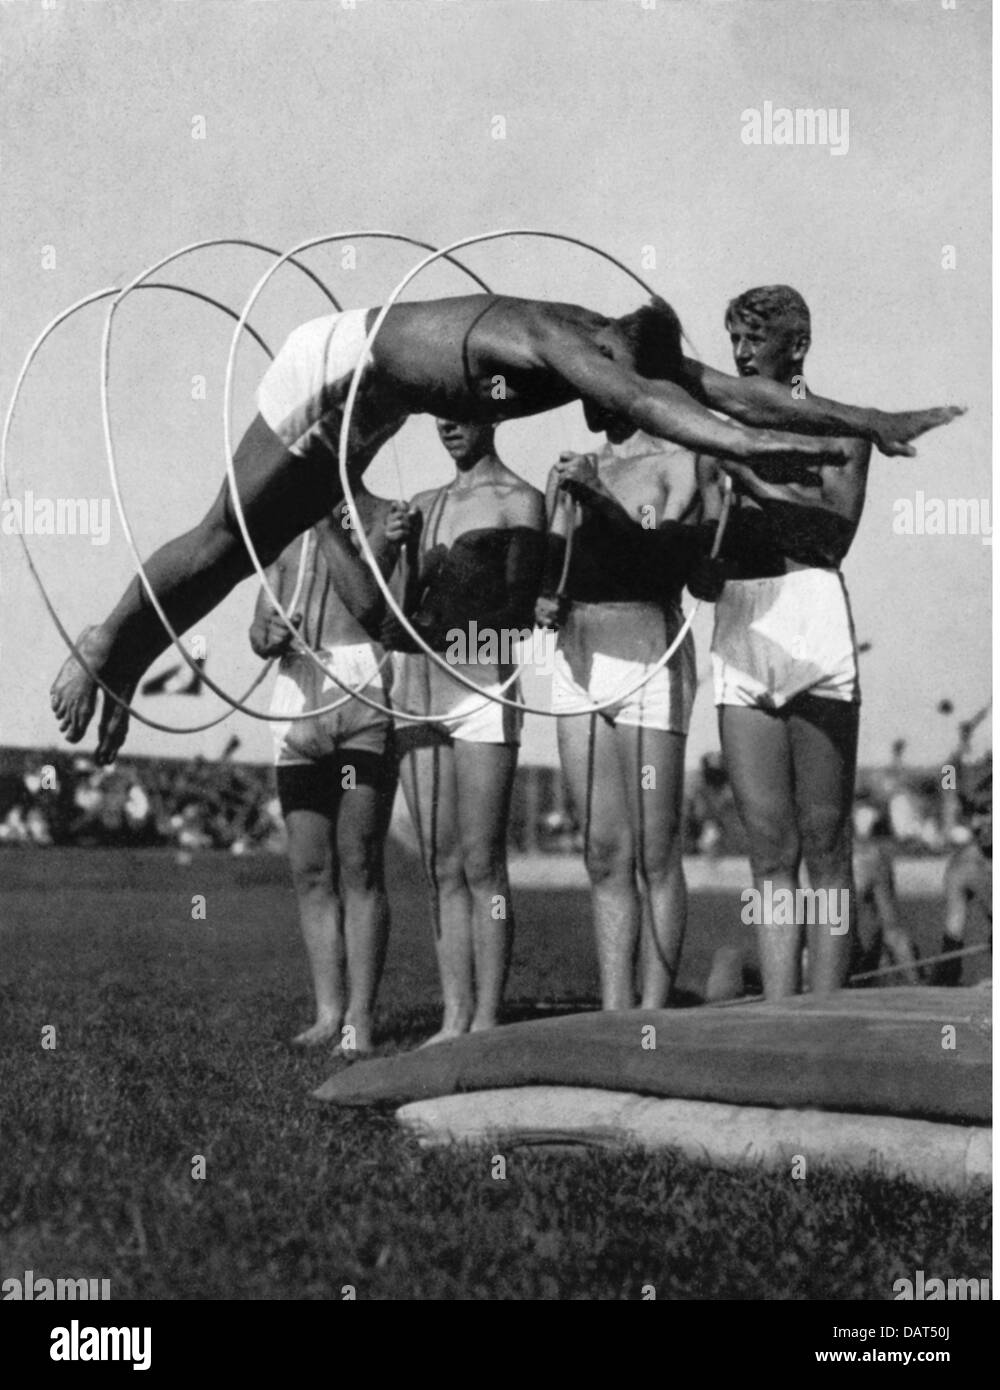 Nazism / National Socialism, sports, sporty demonstration during the Reichsnaehrstand exhibition, Munich, 30.5. - 6.6.1937, Additional-Rights-Clearences-Not Available Stock Photo